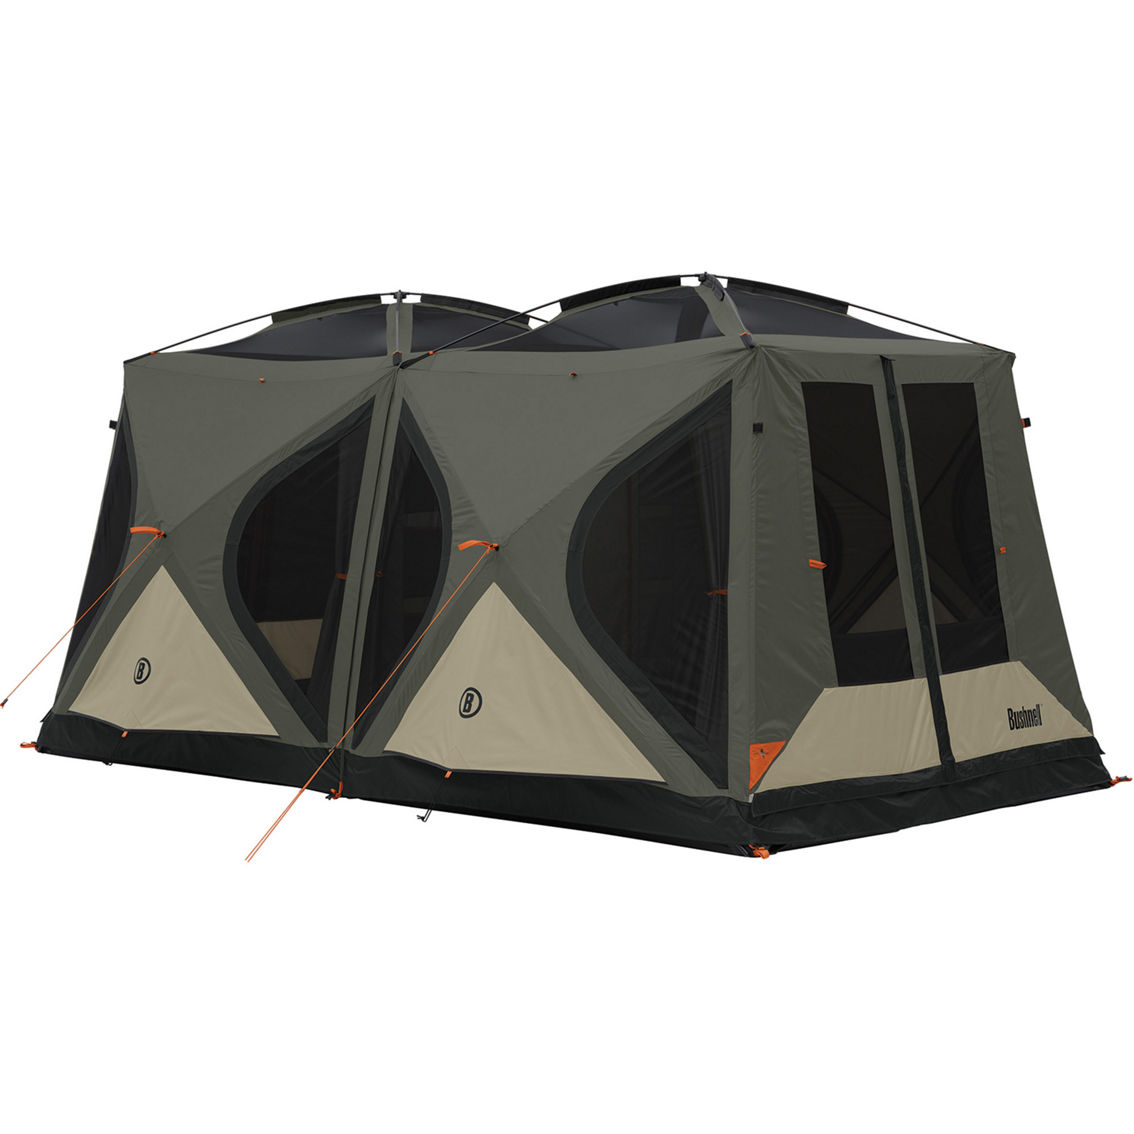 Bushnell 8 Person Pop-Up Hub Tent - Image 2 of 7